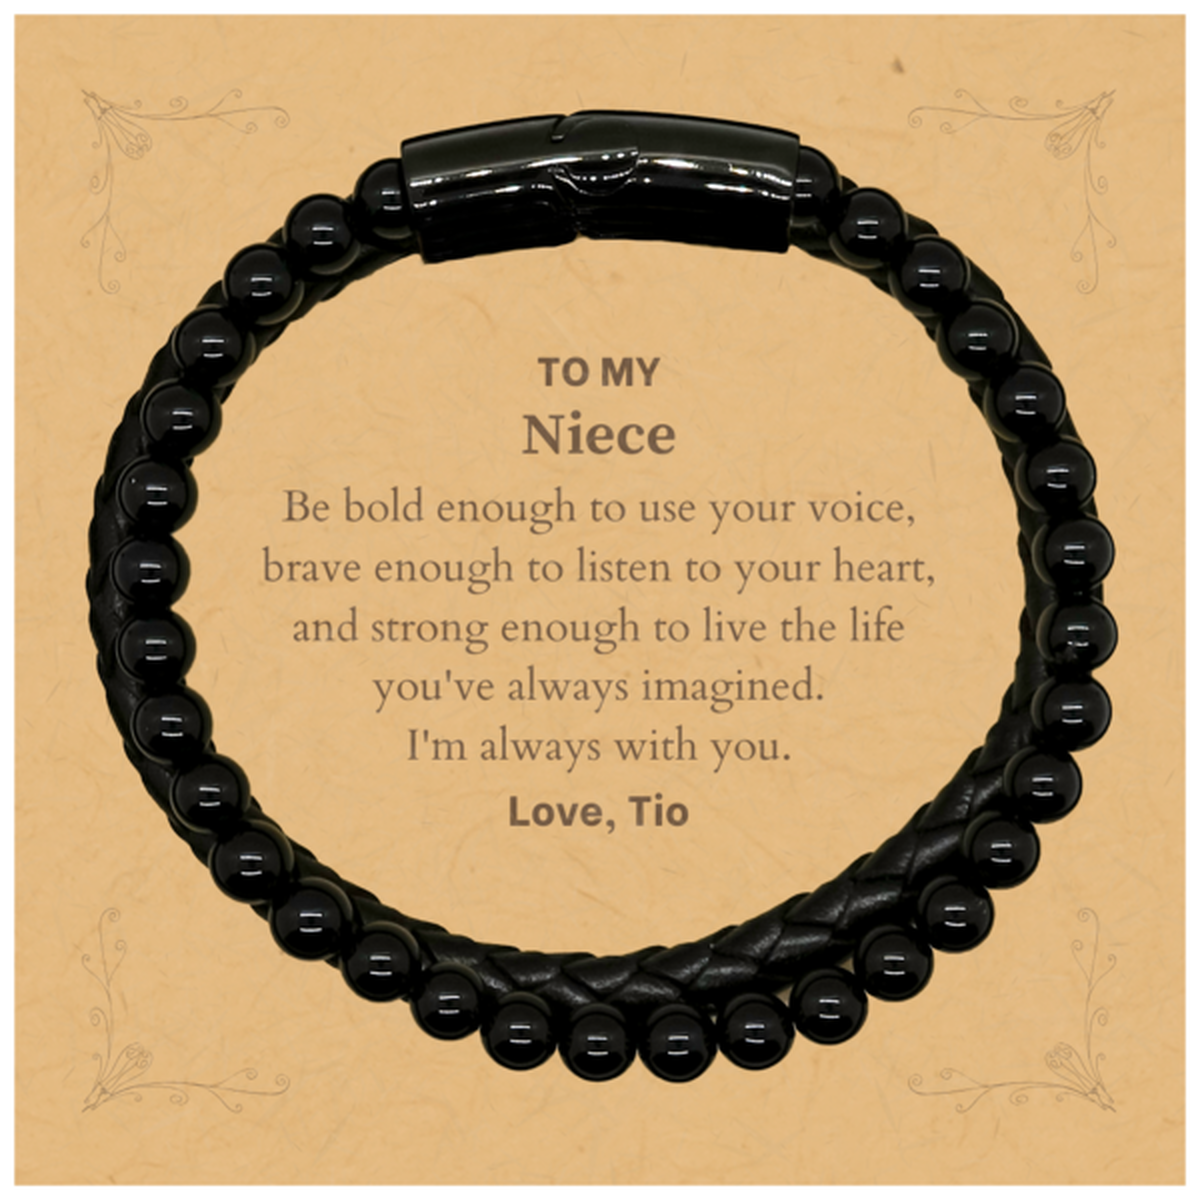 Keepsake Niece Stone Leather Bracelets Gift Idea Graduation Christmas Birthday Niece from Tio, Niece Be bold enough to use your voice, brave enough to listen to your heart. Love, Tio